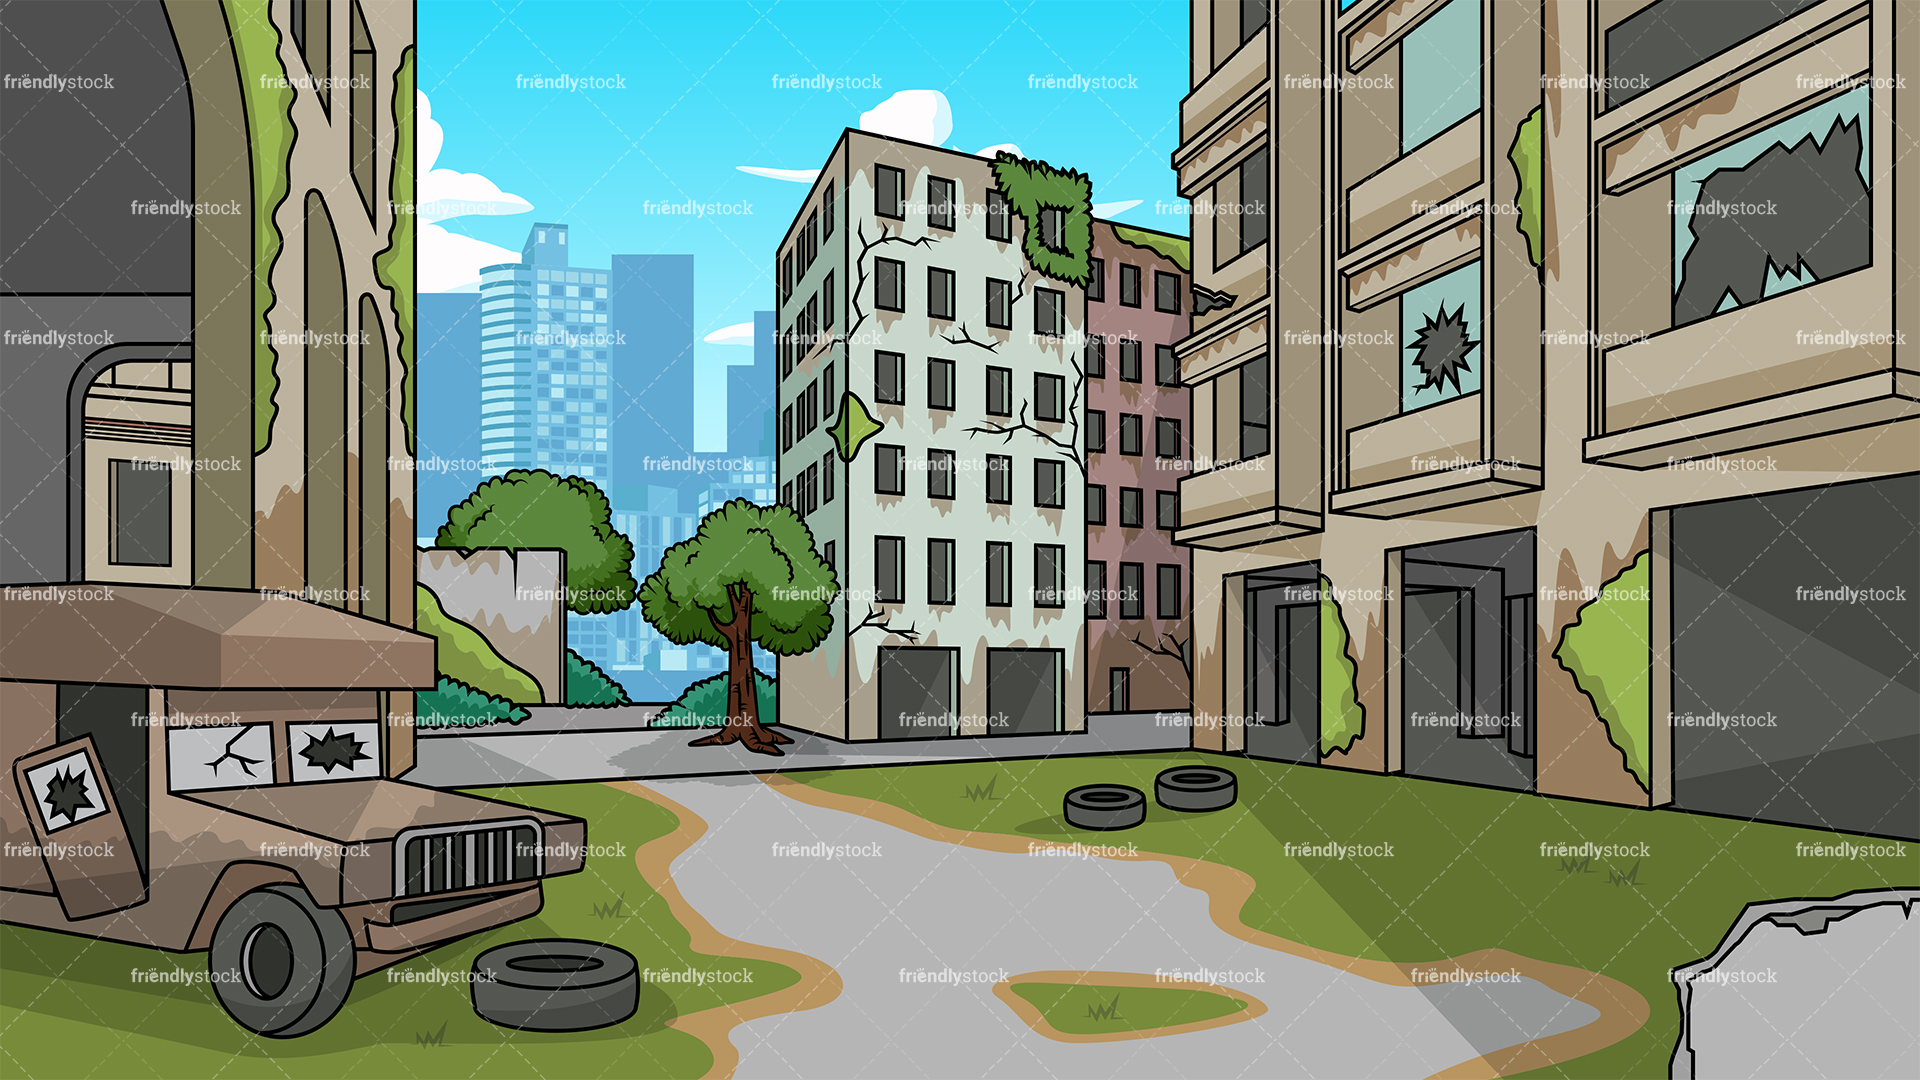 City Background Vector At Vectorified.com | Collection Of City